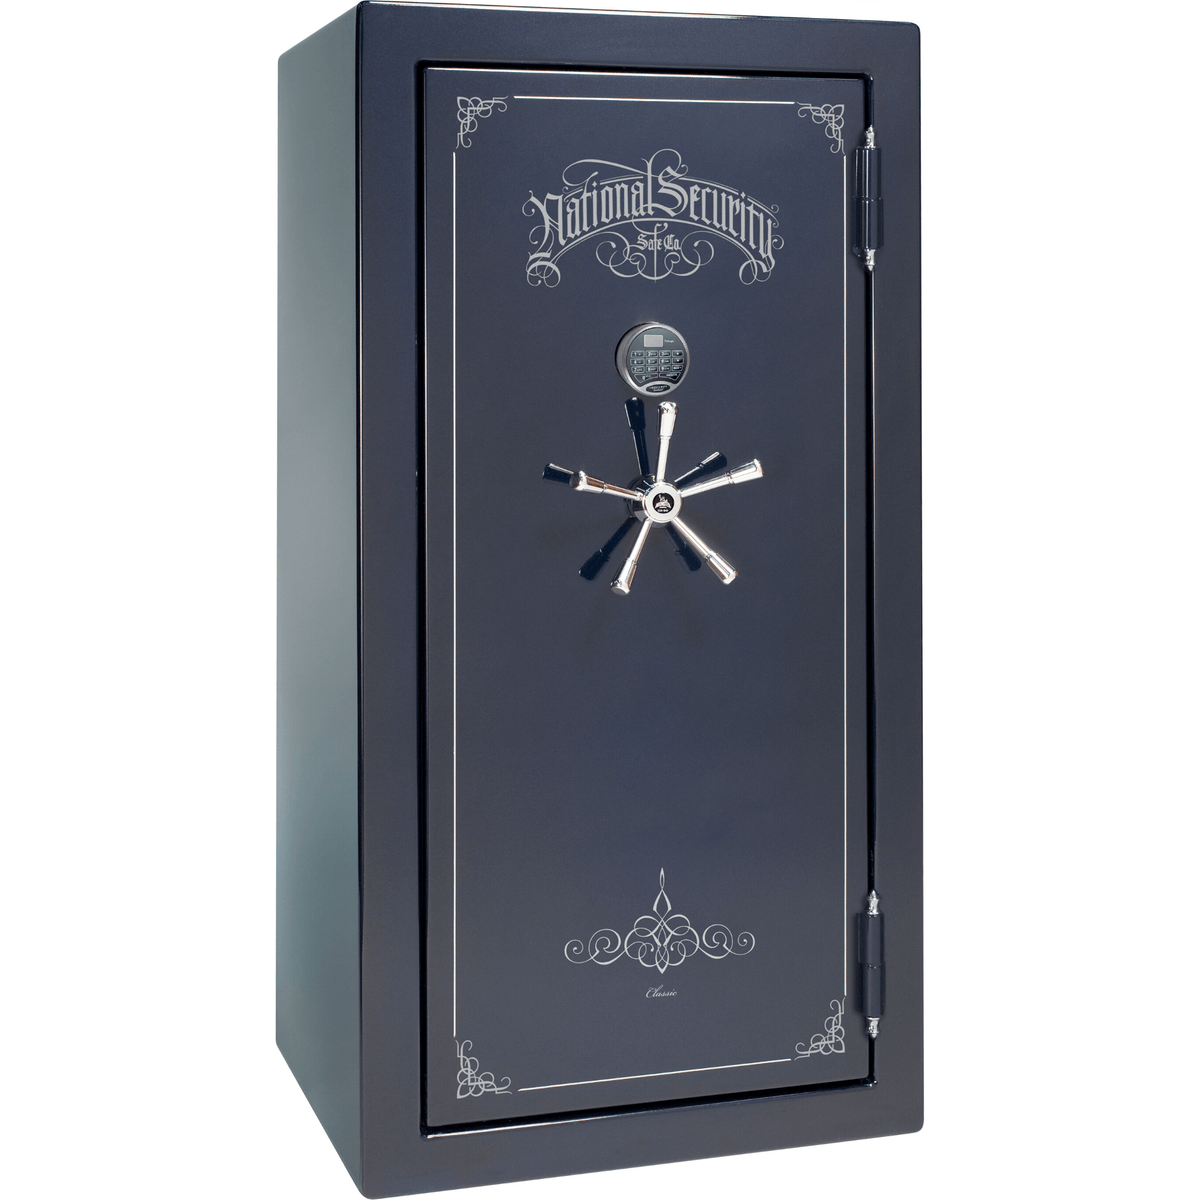 Liberty Safe Classic Plus 25 in Blue Gloss with Chrome Electronic Lock, closed door.